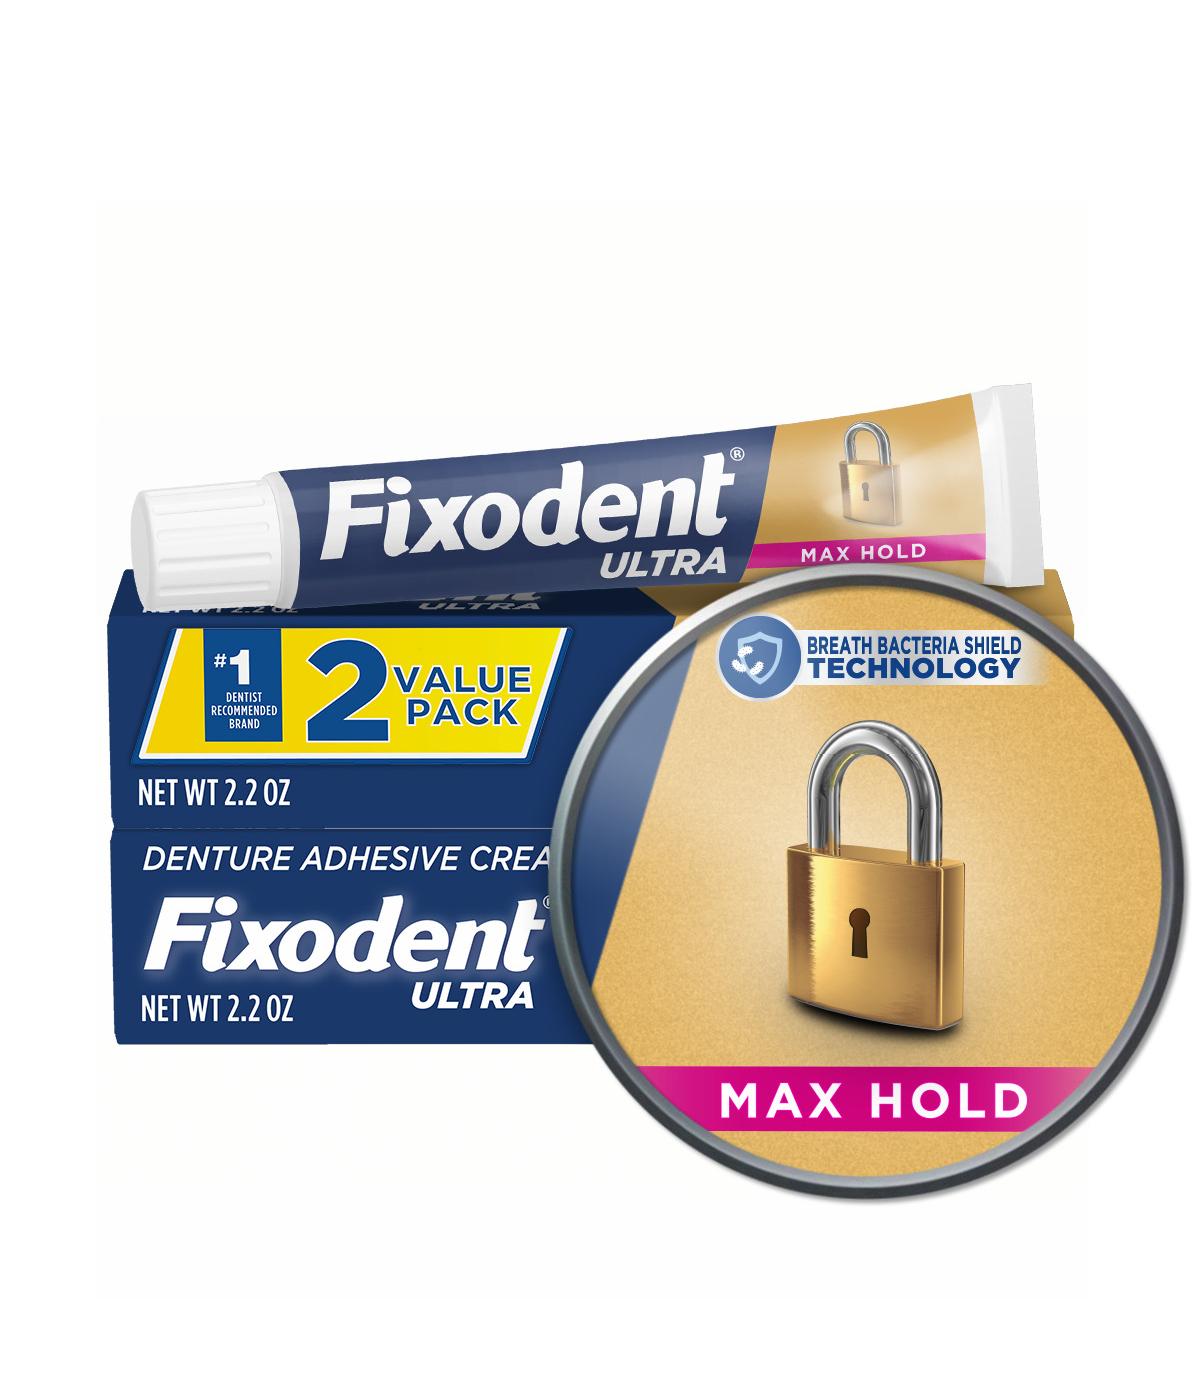 FIXODENT ULTRA Ultra Max Hold Denture Adhesive Cream, 2 pk; image 7 of 8